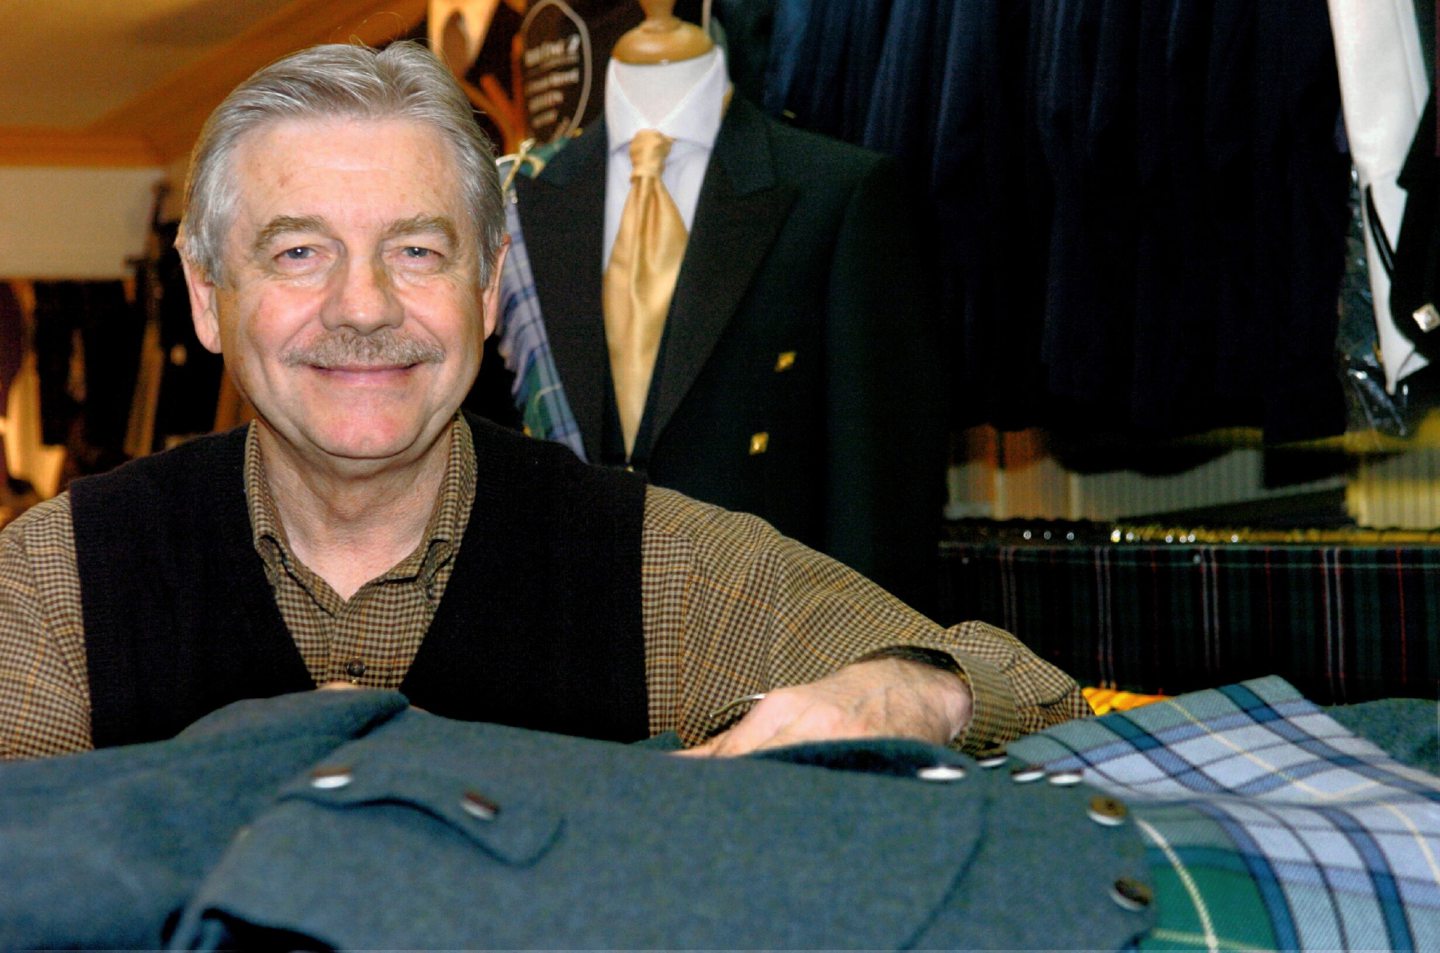 Elvis Presley's cousin, Archie Bennet, with the Presley tartan outfit in 2004.